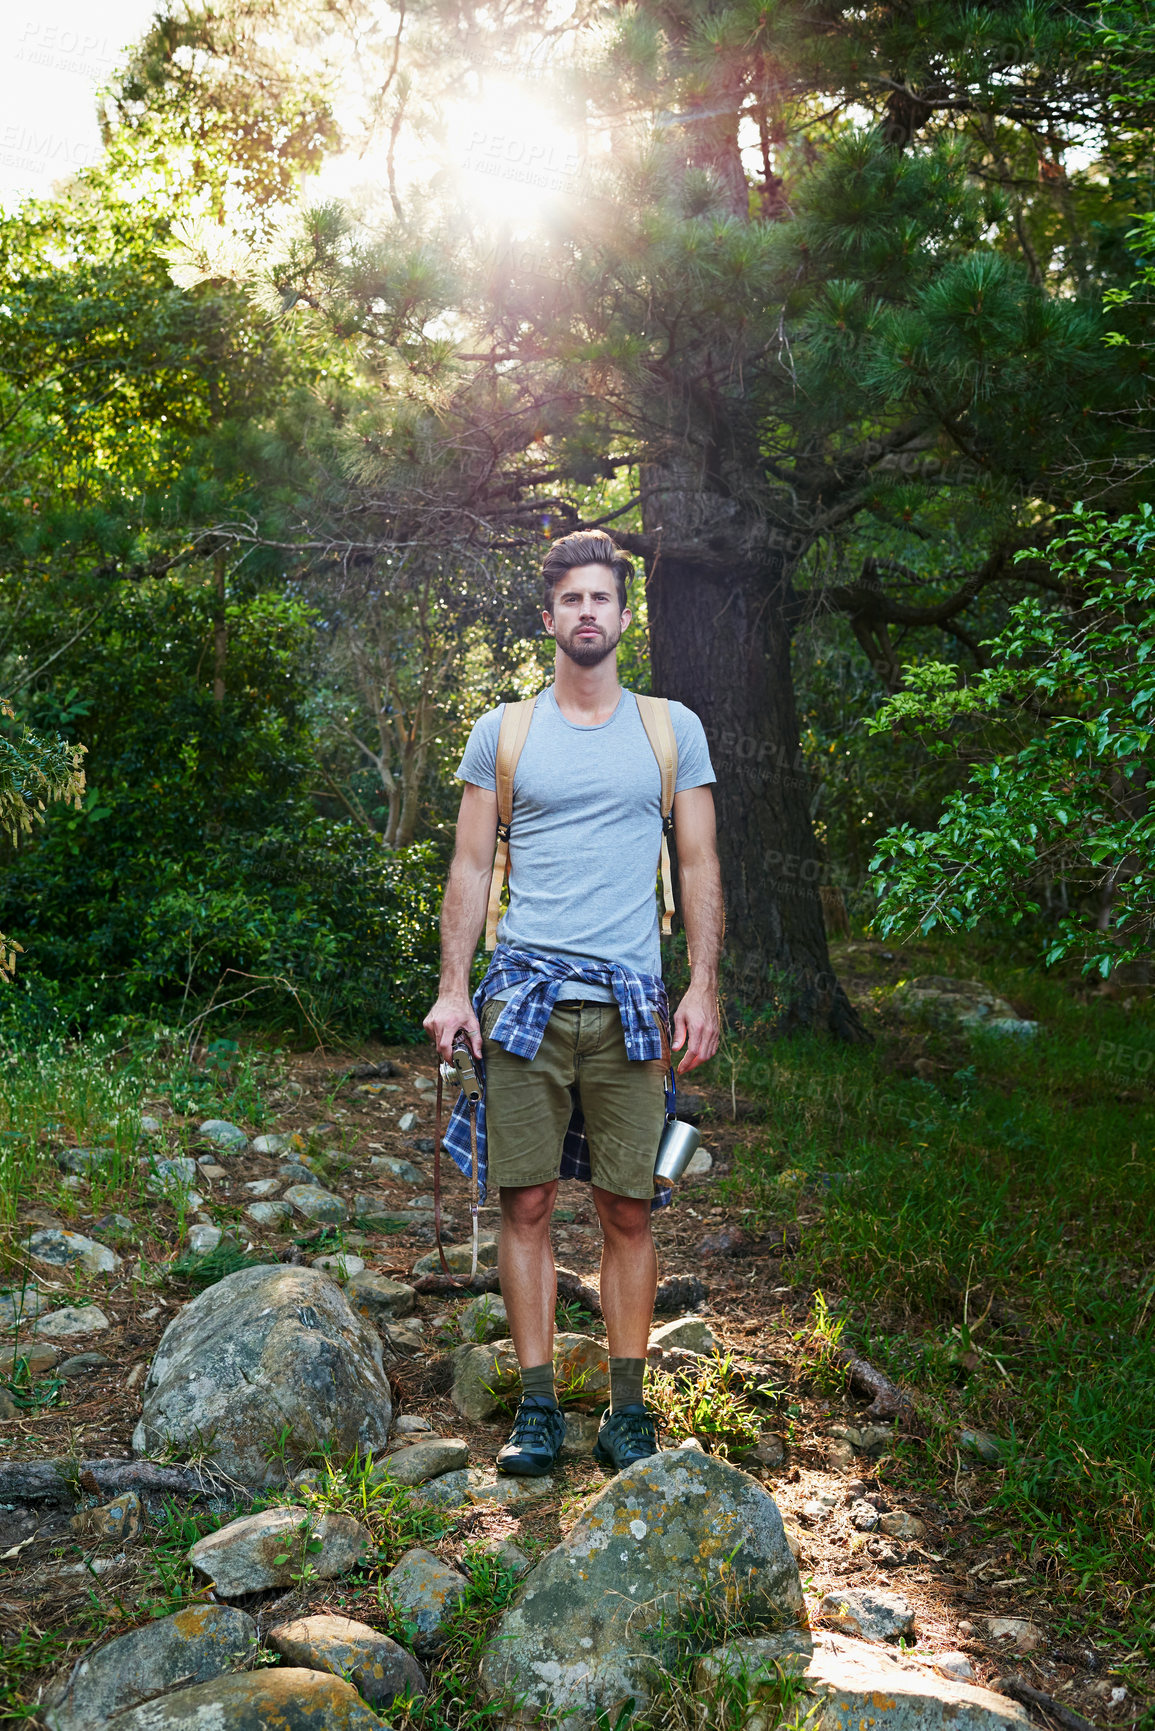 Buy stock photo Shot of a young outdoorsman on a hike